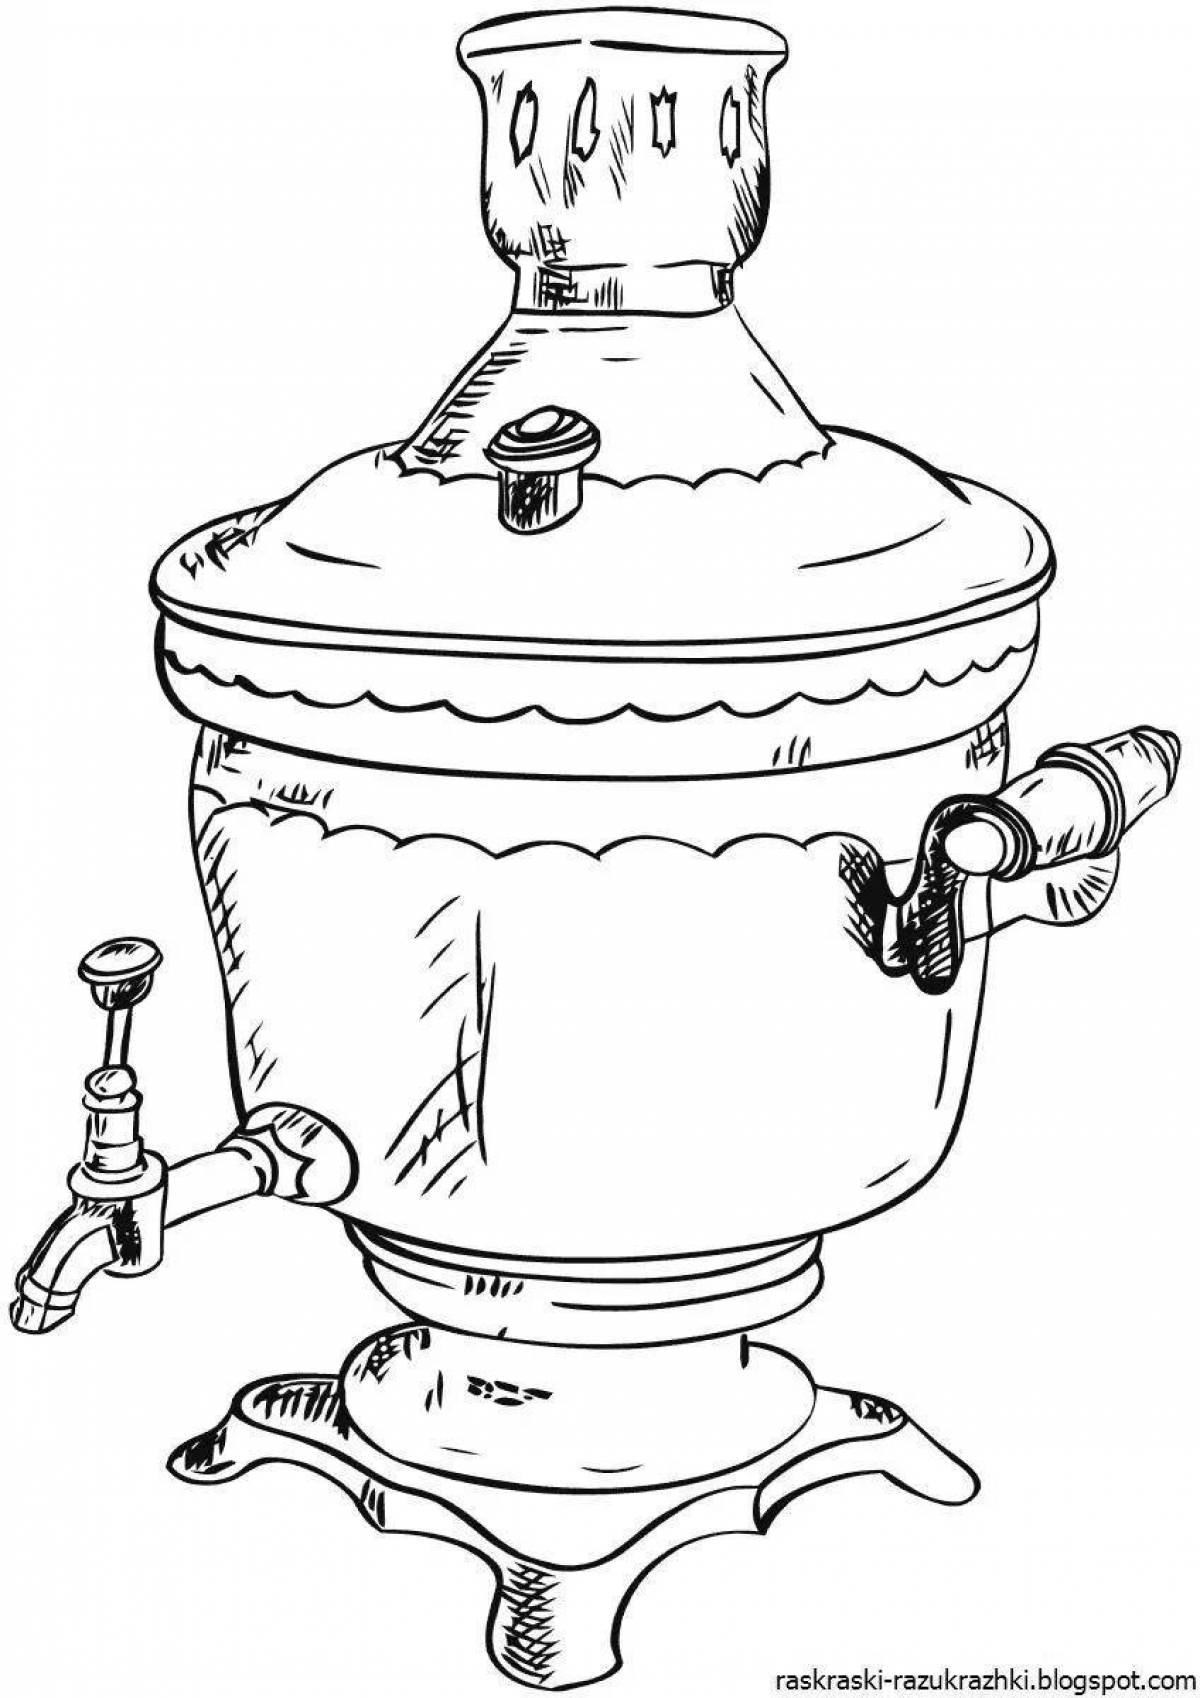 Coloring page charming samovar for children 6-7 years old